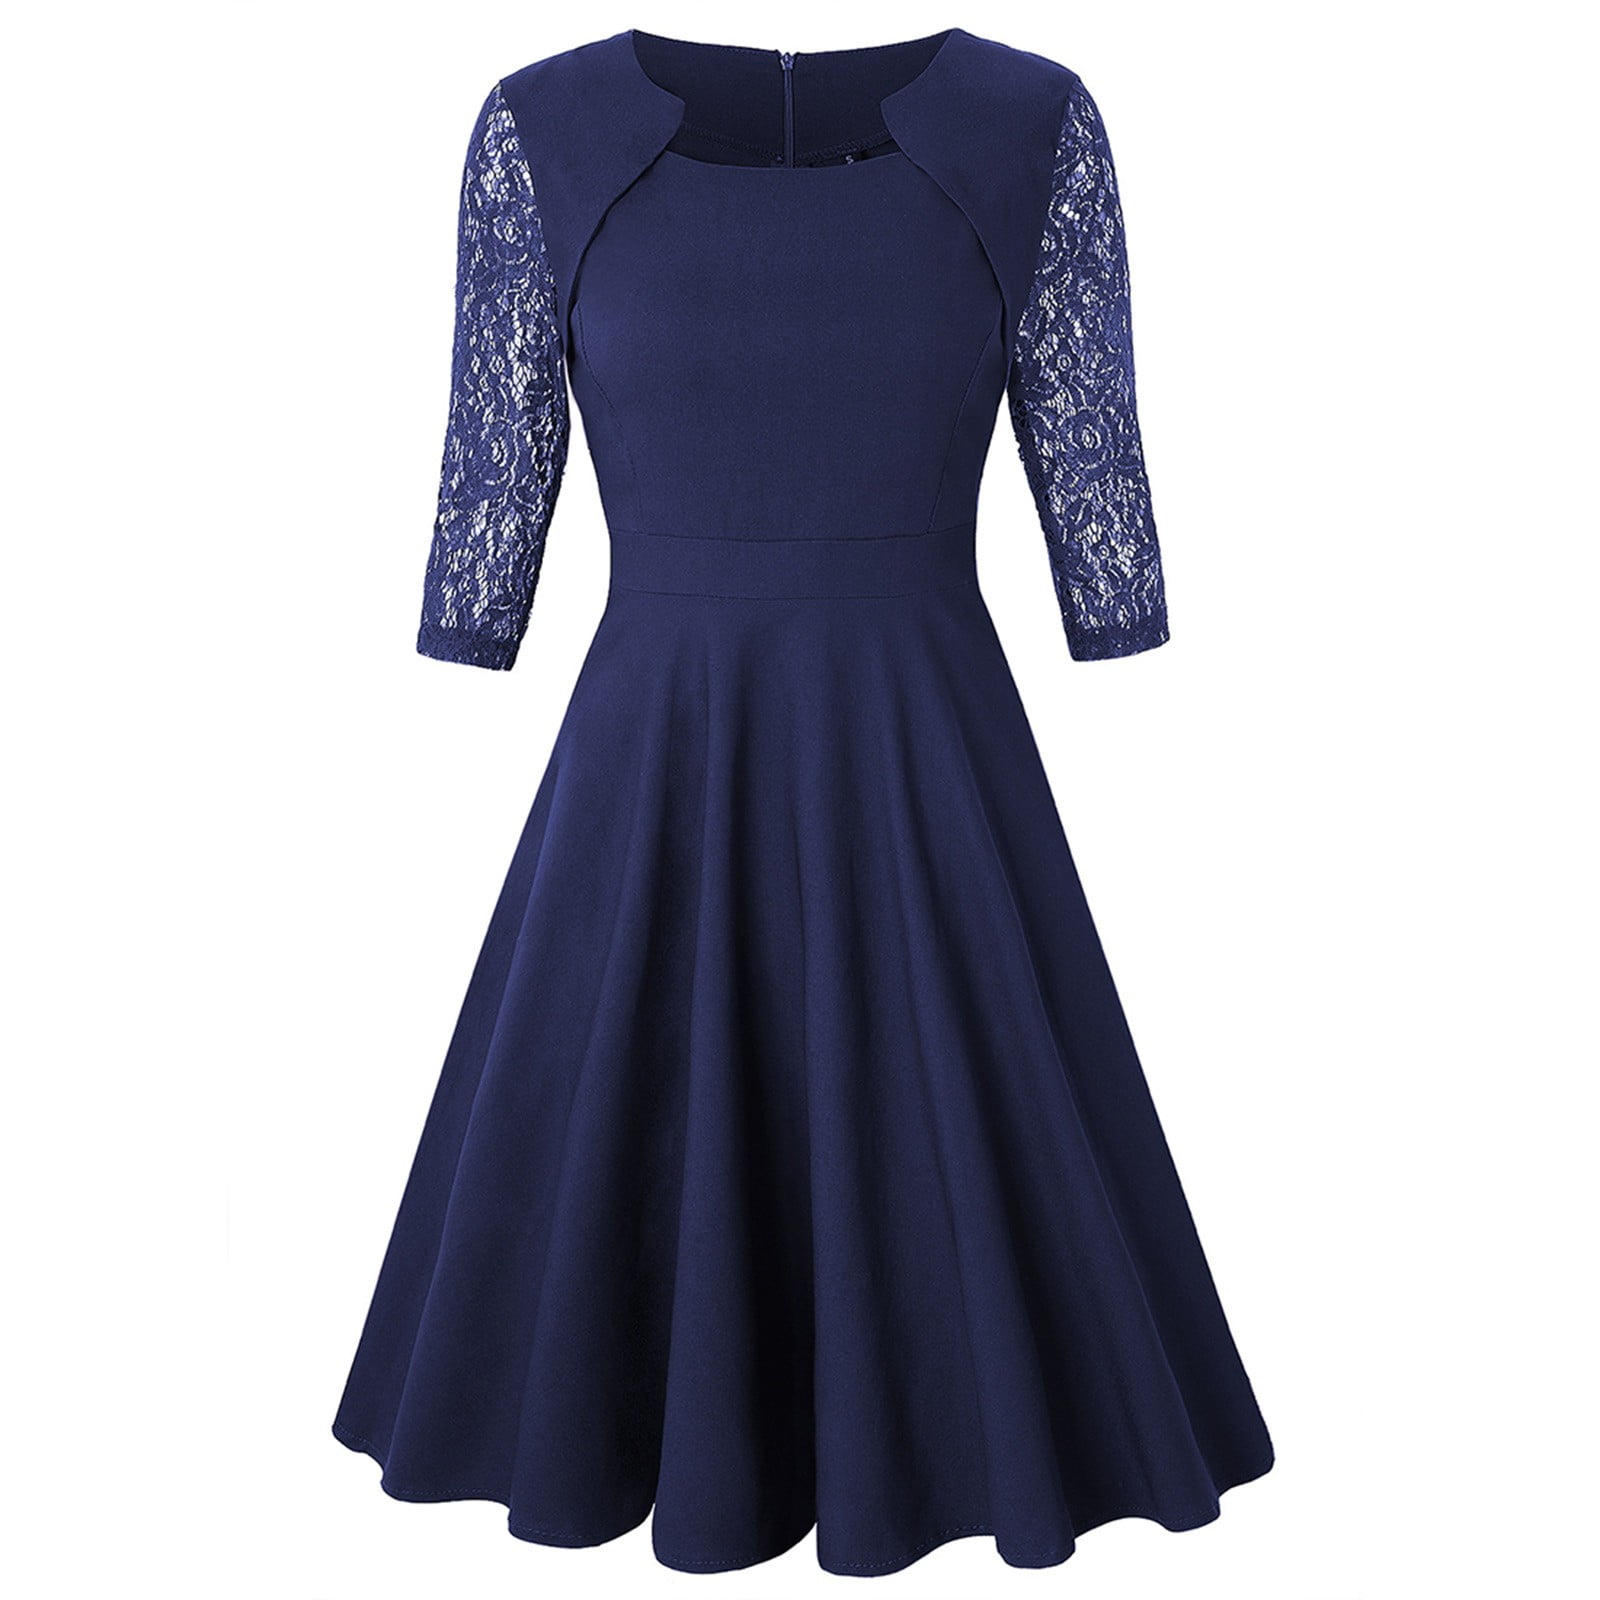 BEEYASO Clearance Summer Dresses for Women Elbow-Length A-Line Above knee  Leisure Solid Boat Neck Dress Navy S 